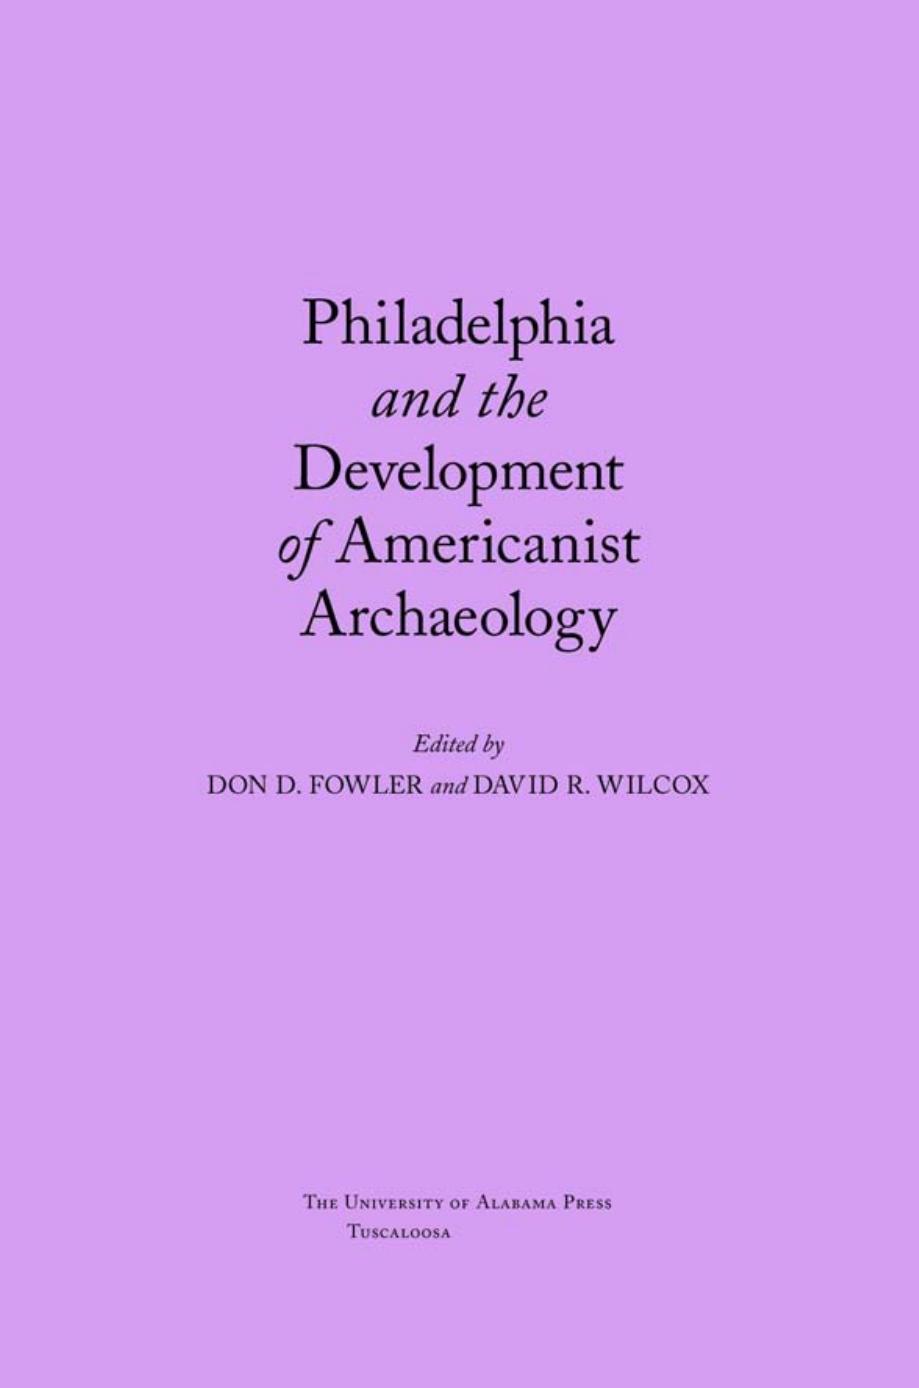 Philadelphia and the Development of Americanist Archaeology by unknow